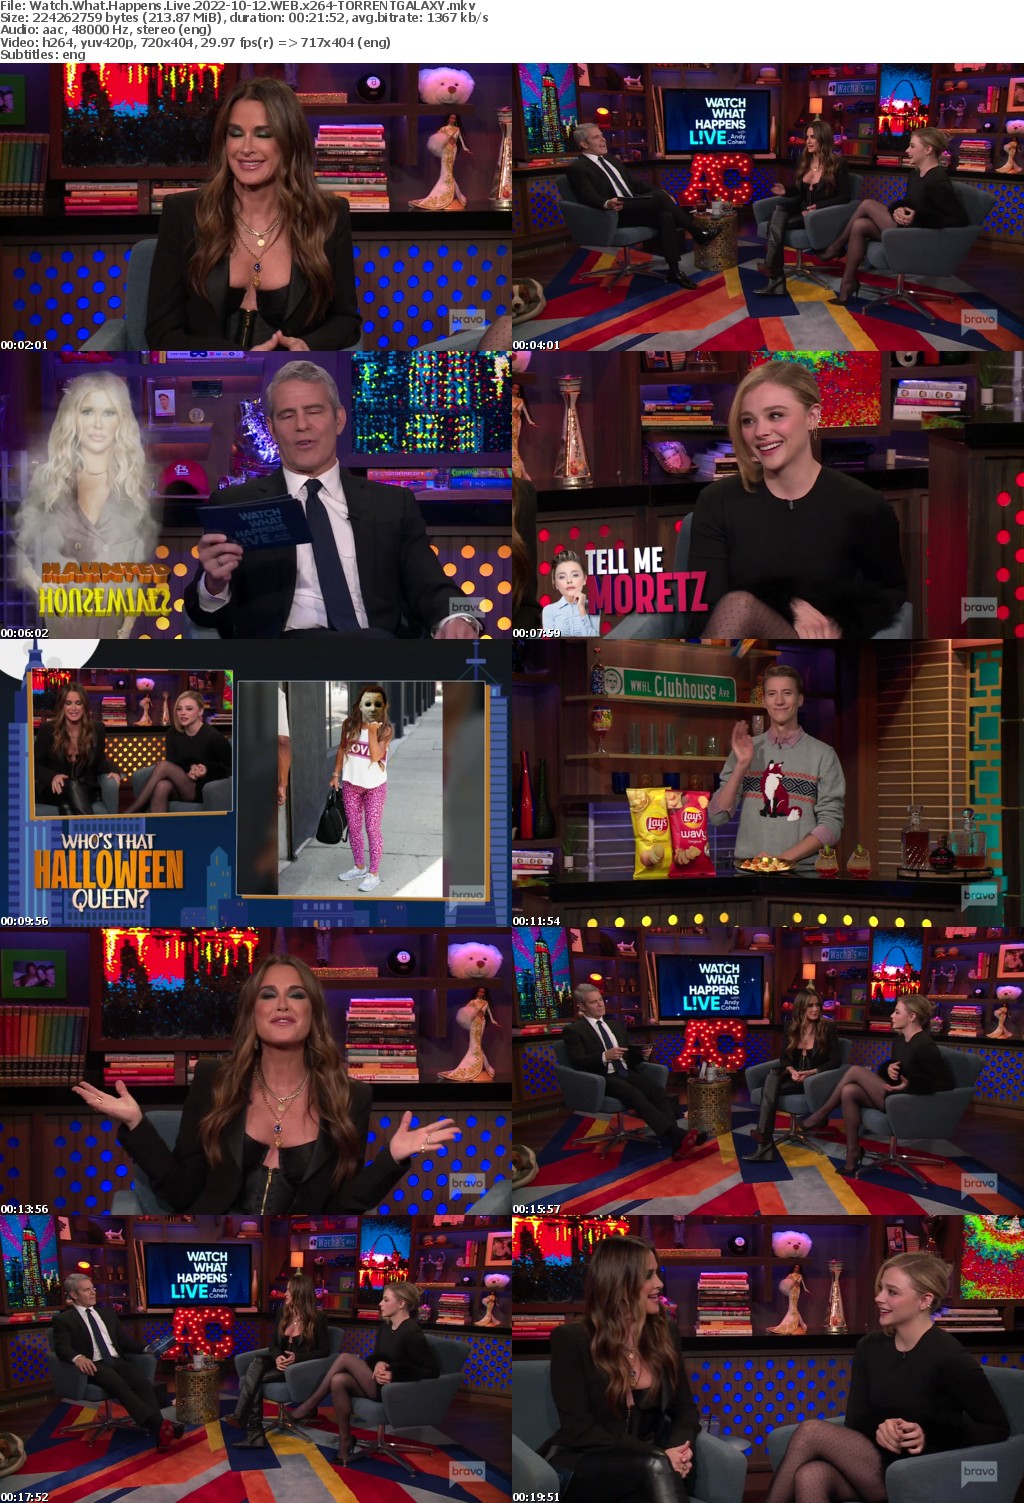 Watch What Happens Live 2022-10-12 WEB x264-GALAXY